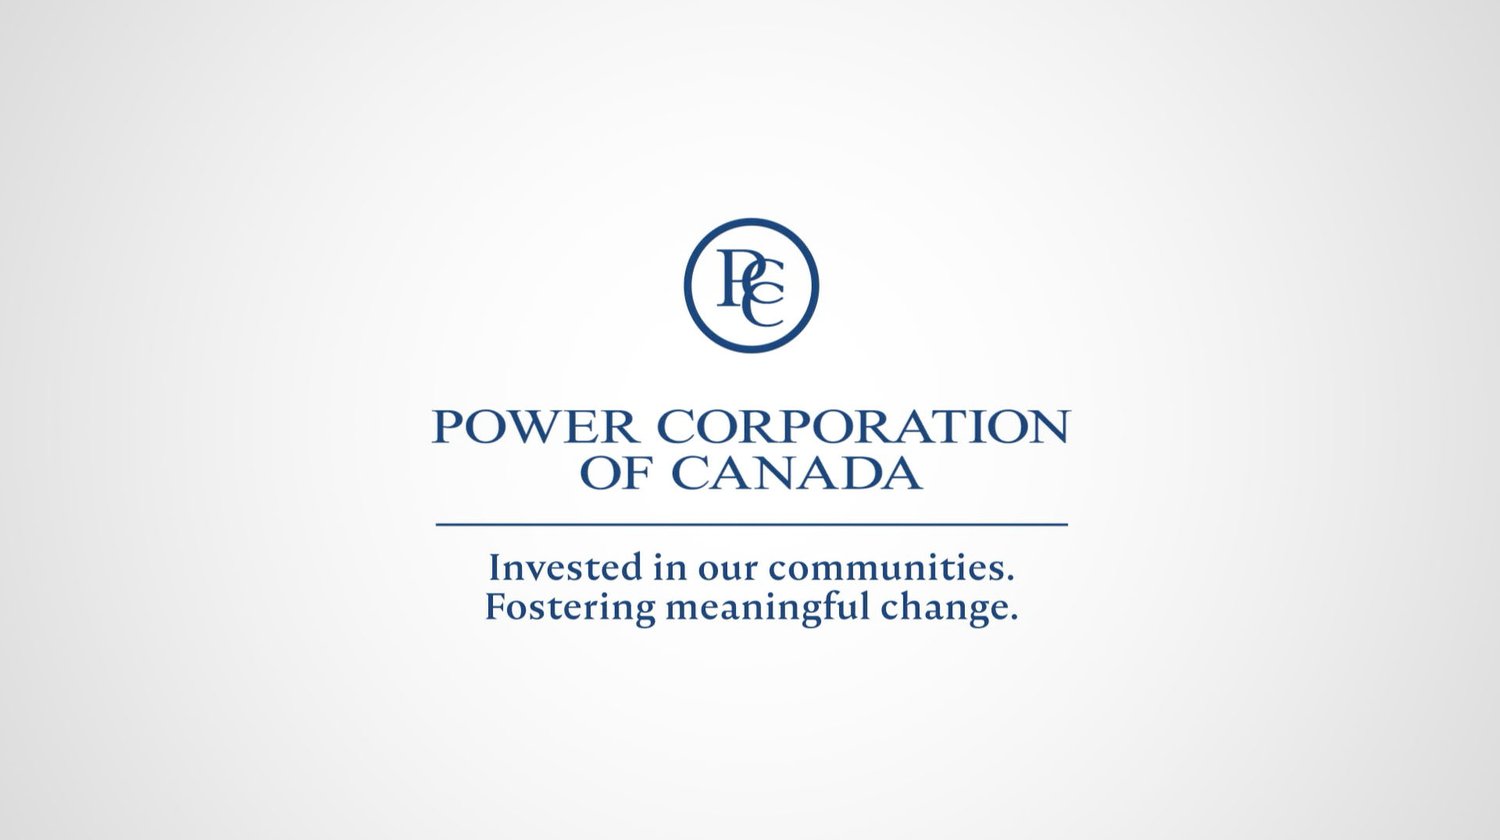 Power Corporation in the community